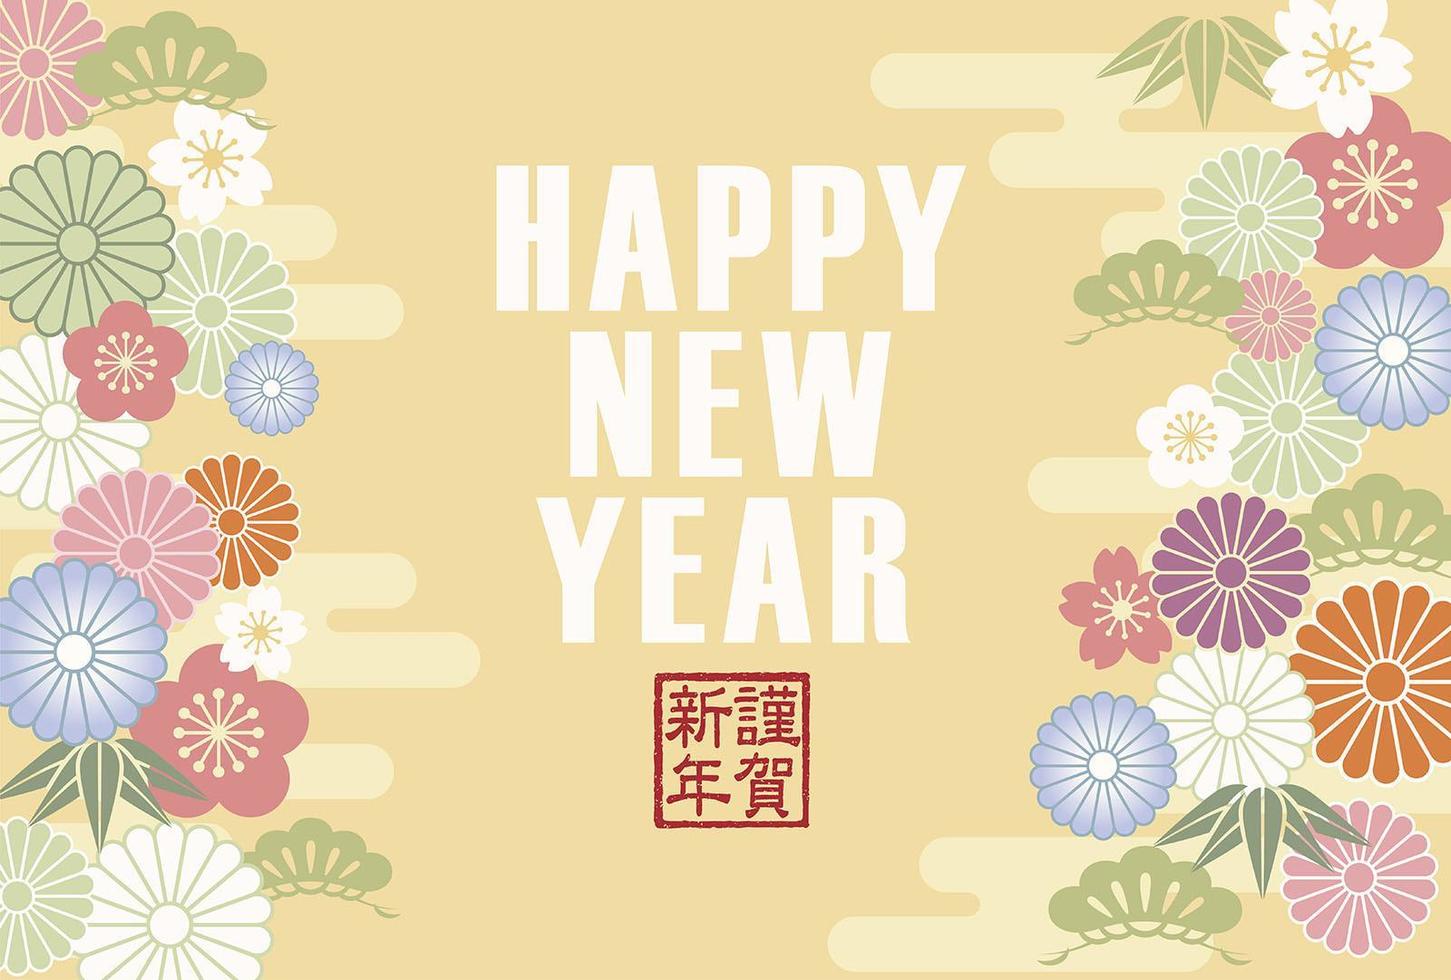 New Years Greeting Card Vector Template Decorated With Japanese Vintage Auspicious Charms.